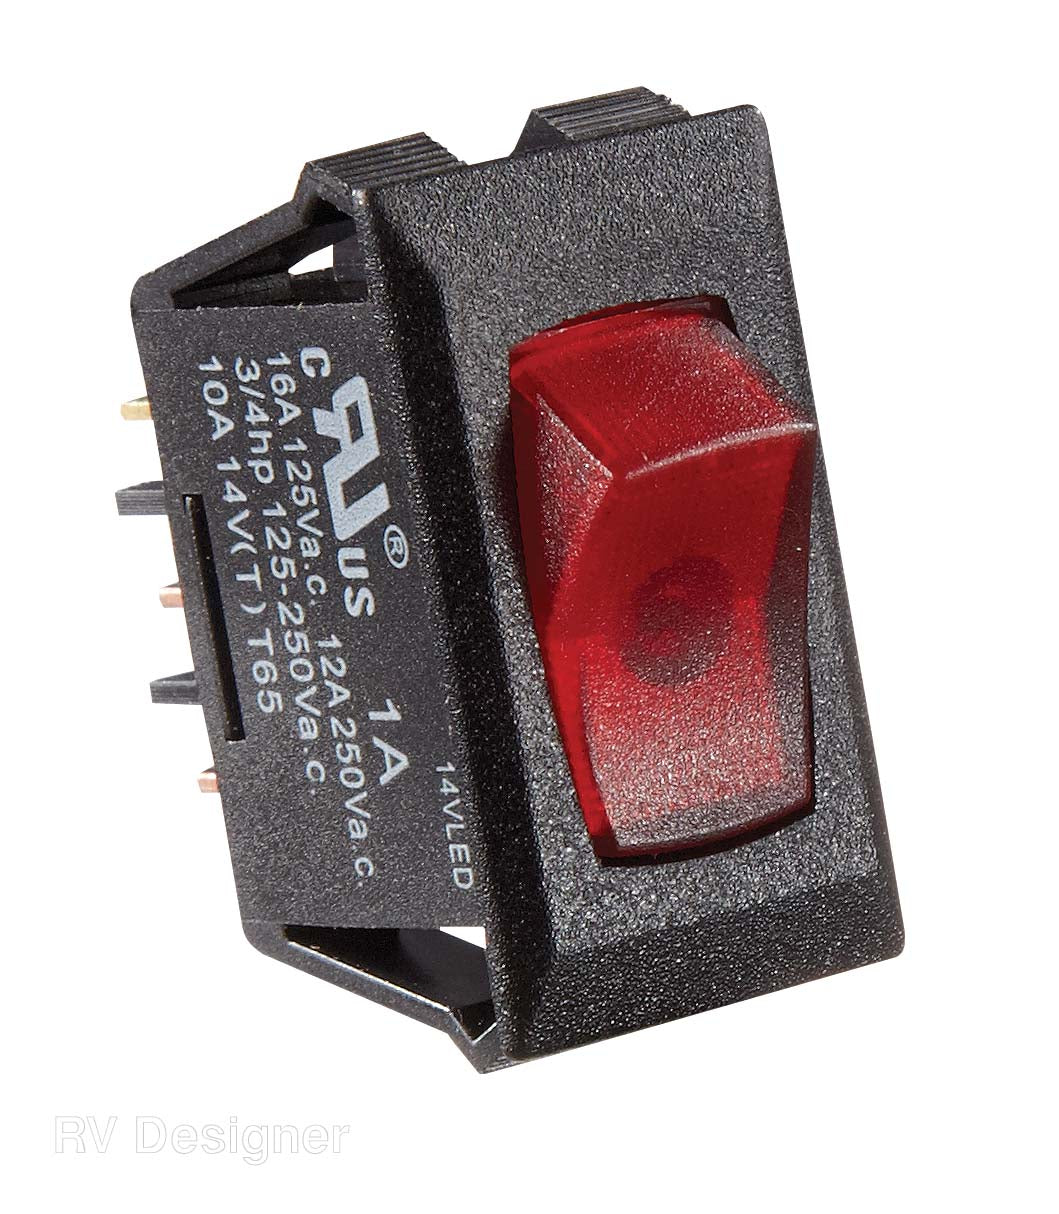 Multi Purpose Switch; Use For Lighting/ Water Heater/ Water Pump